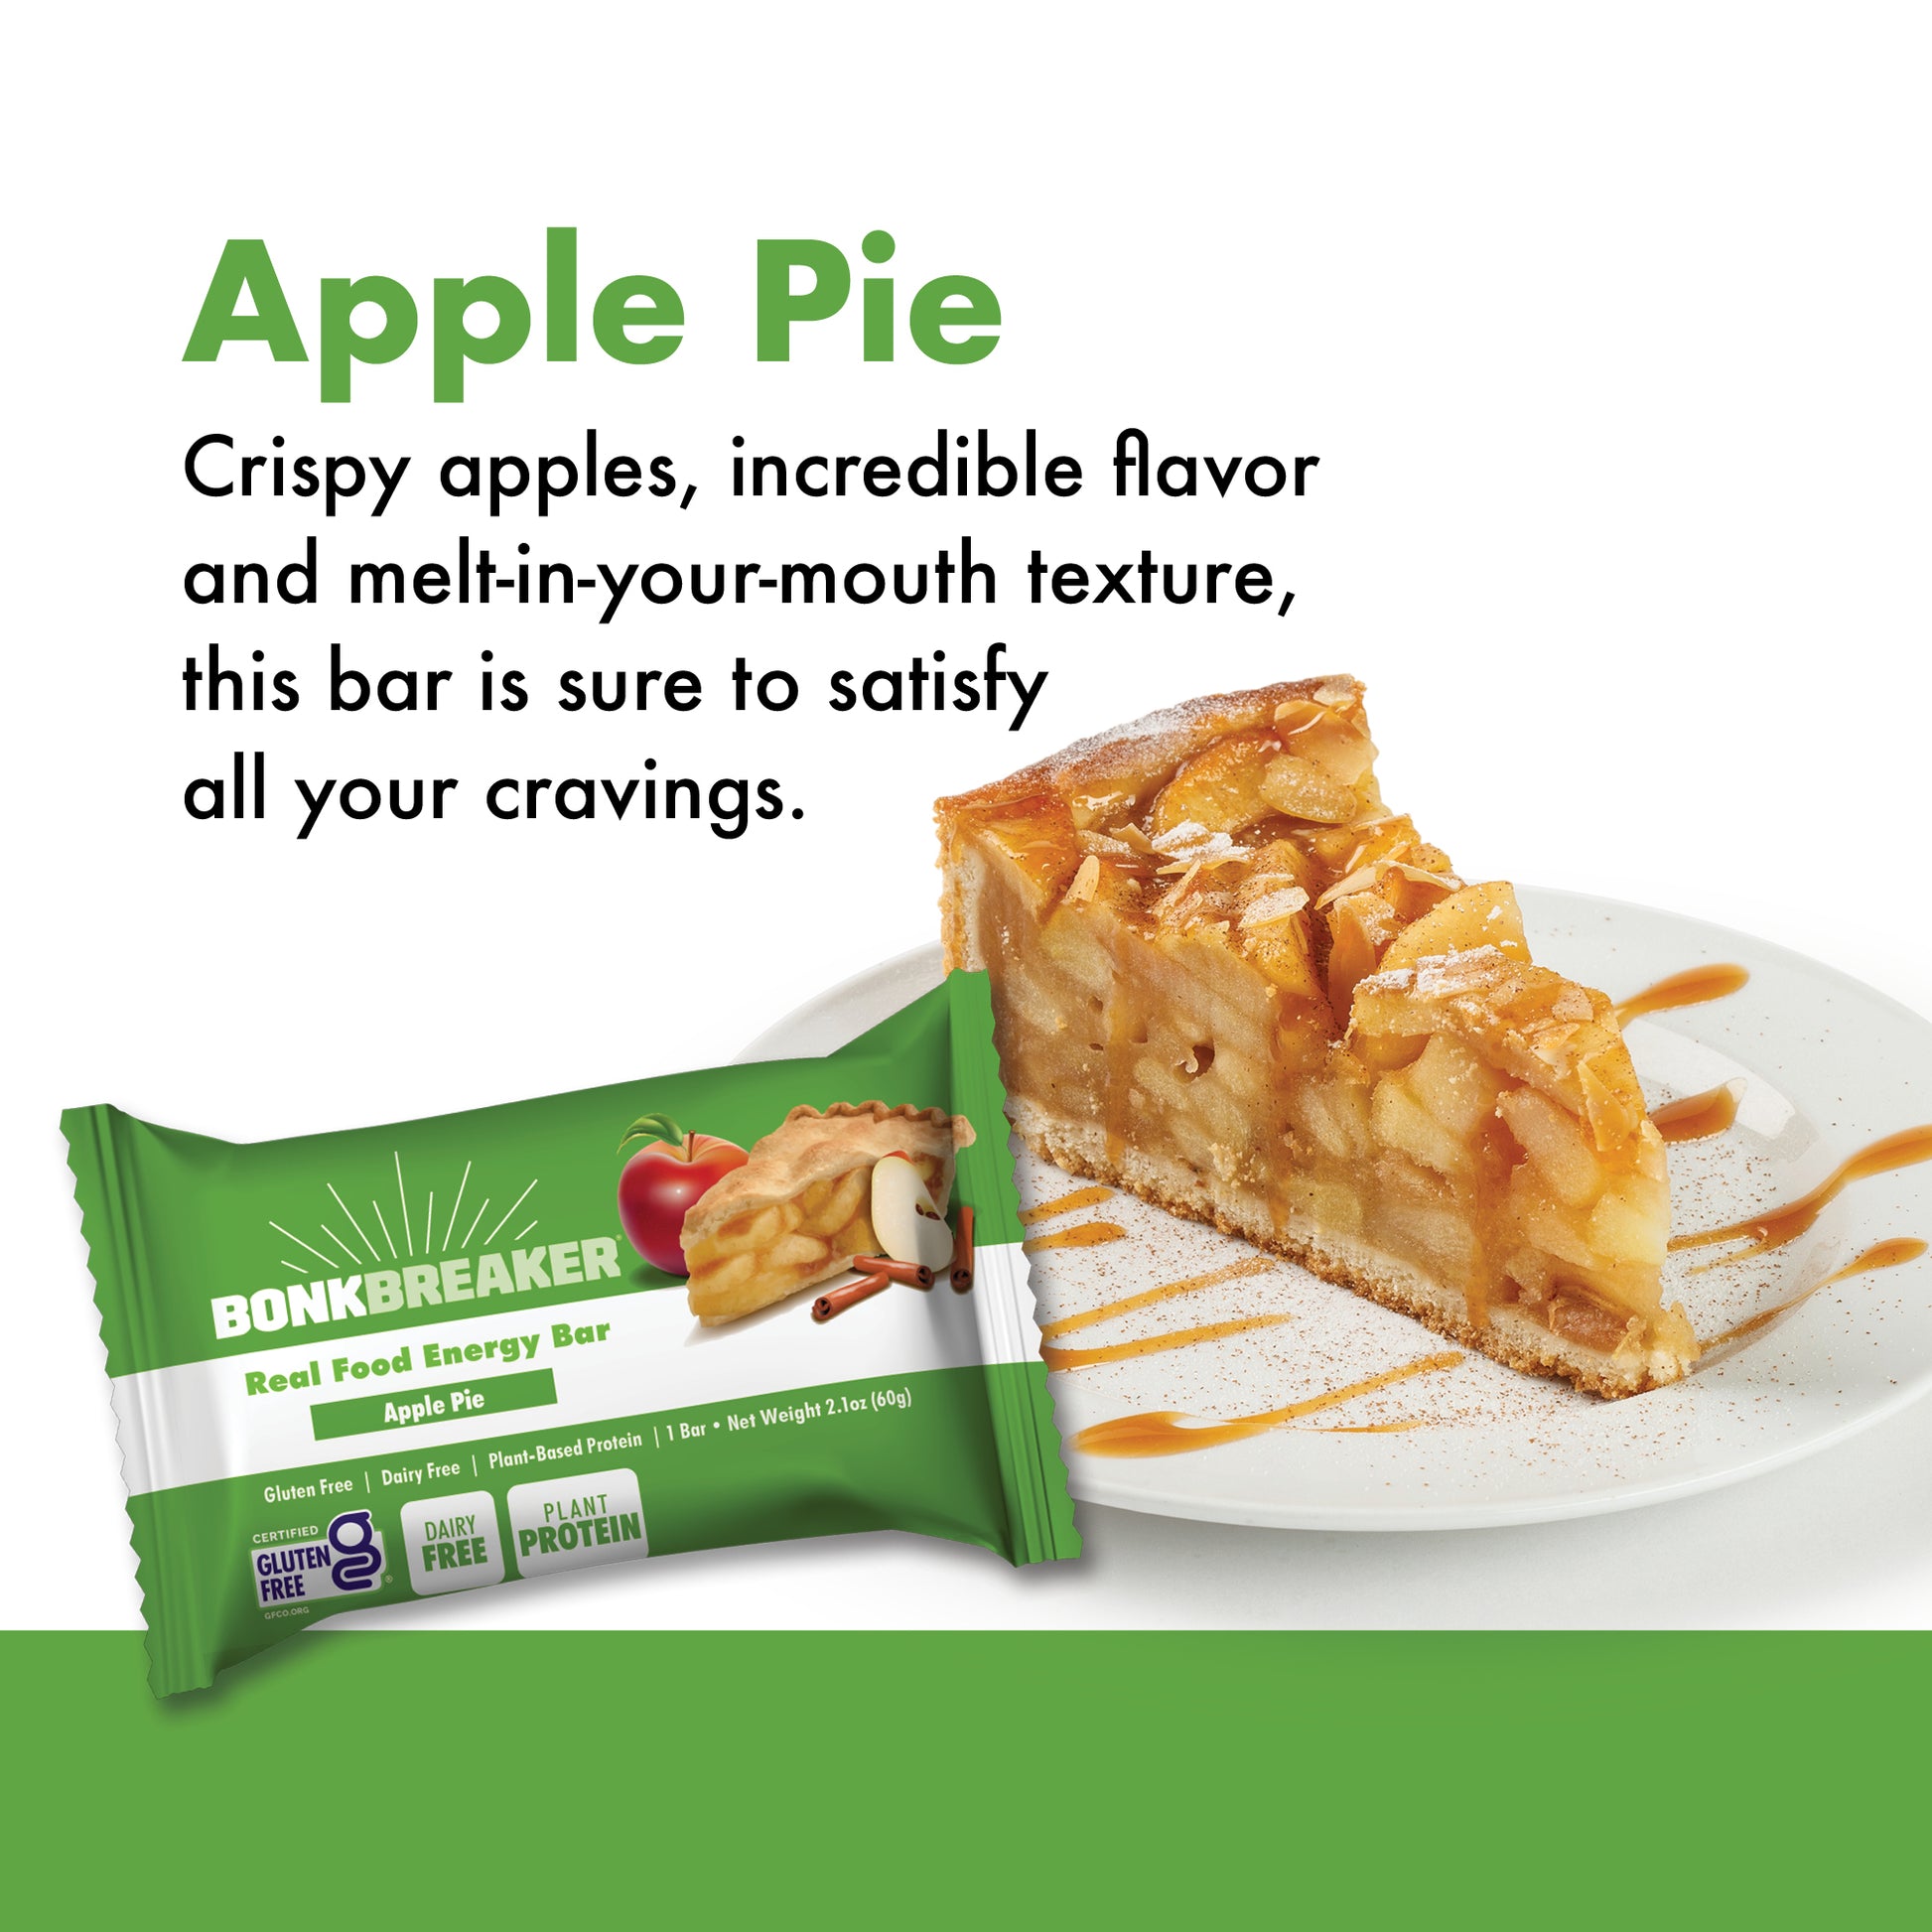 Apple Pie - Crispy apples, incredible flavor and melt-in-your-mouth texture, this bar is sure to satisfy all your cravings.